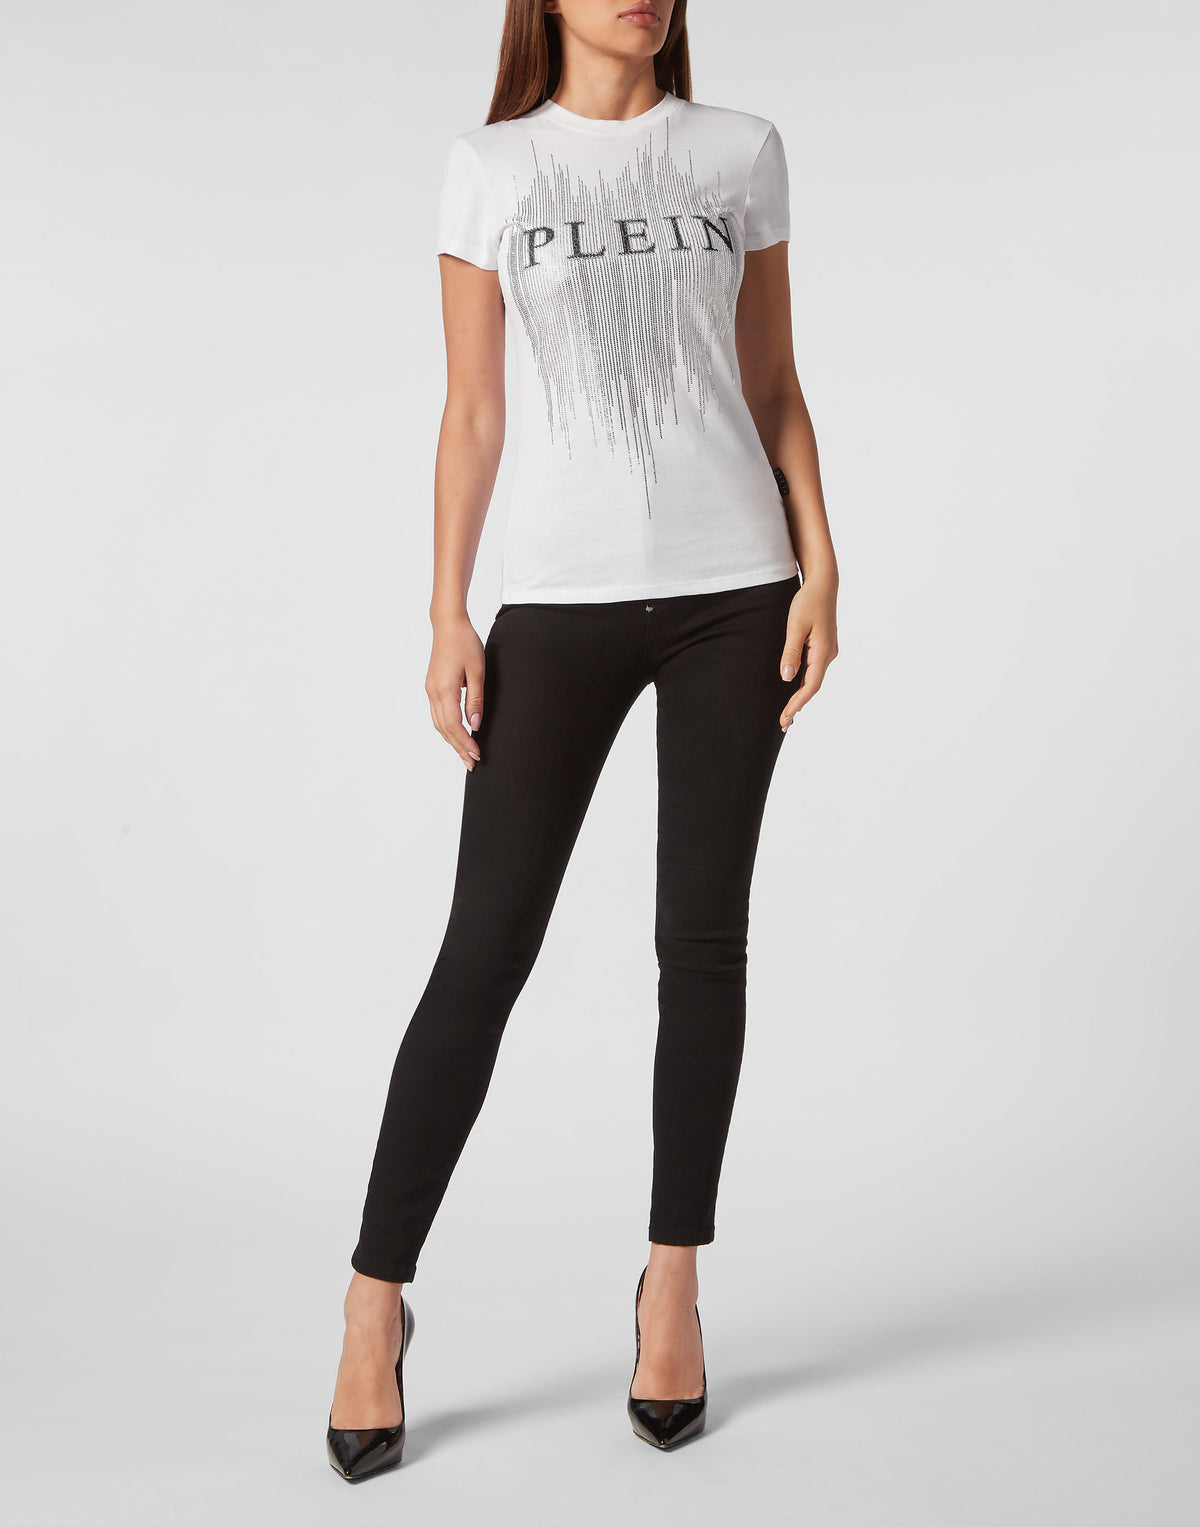 T-shirt Round Neck Sexy Pure Fit white